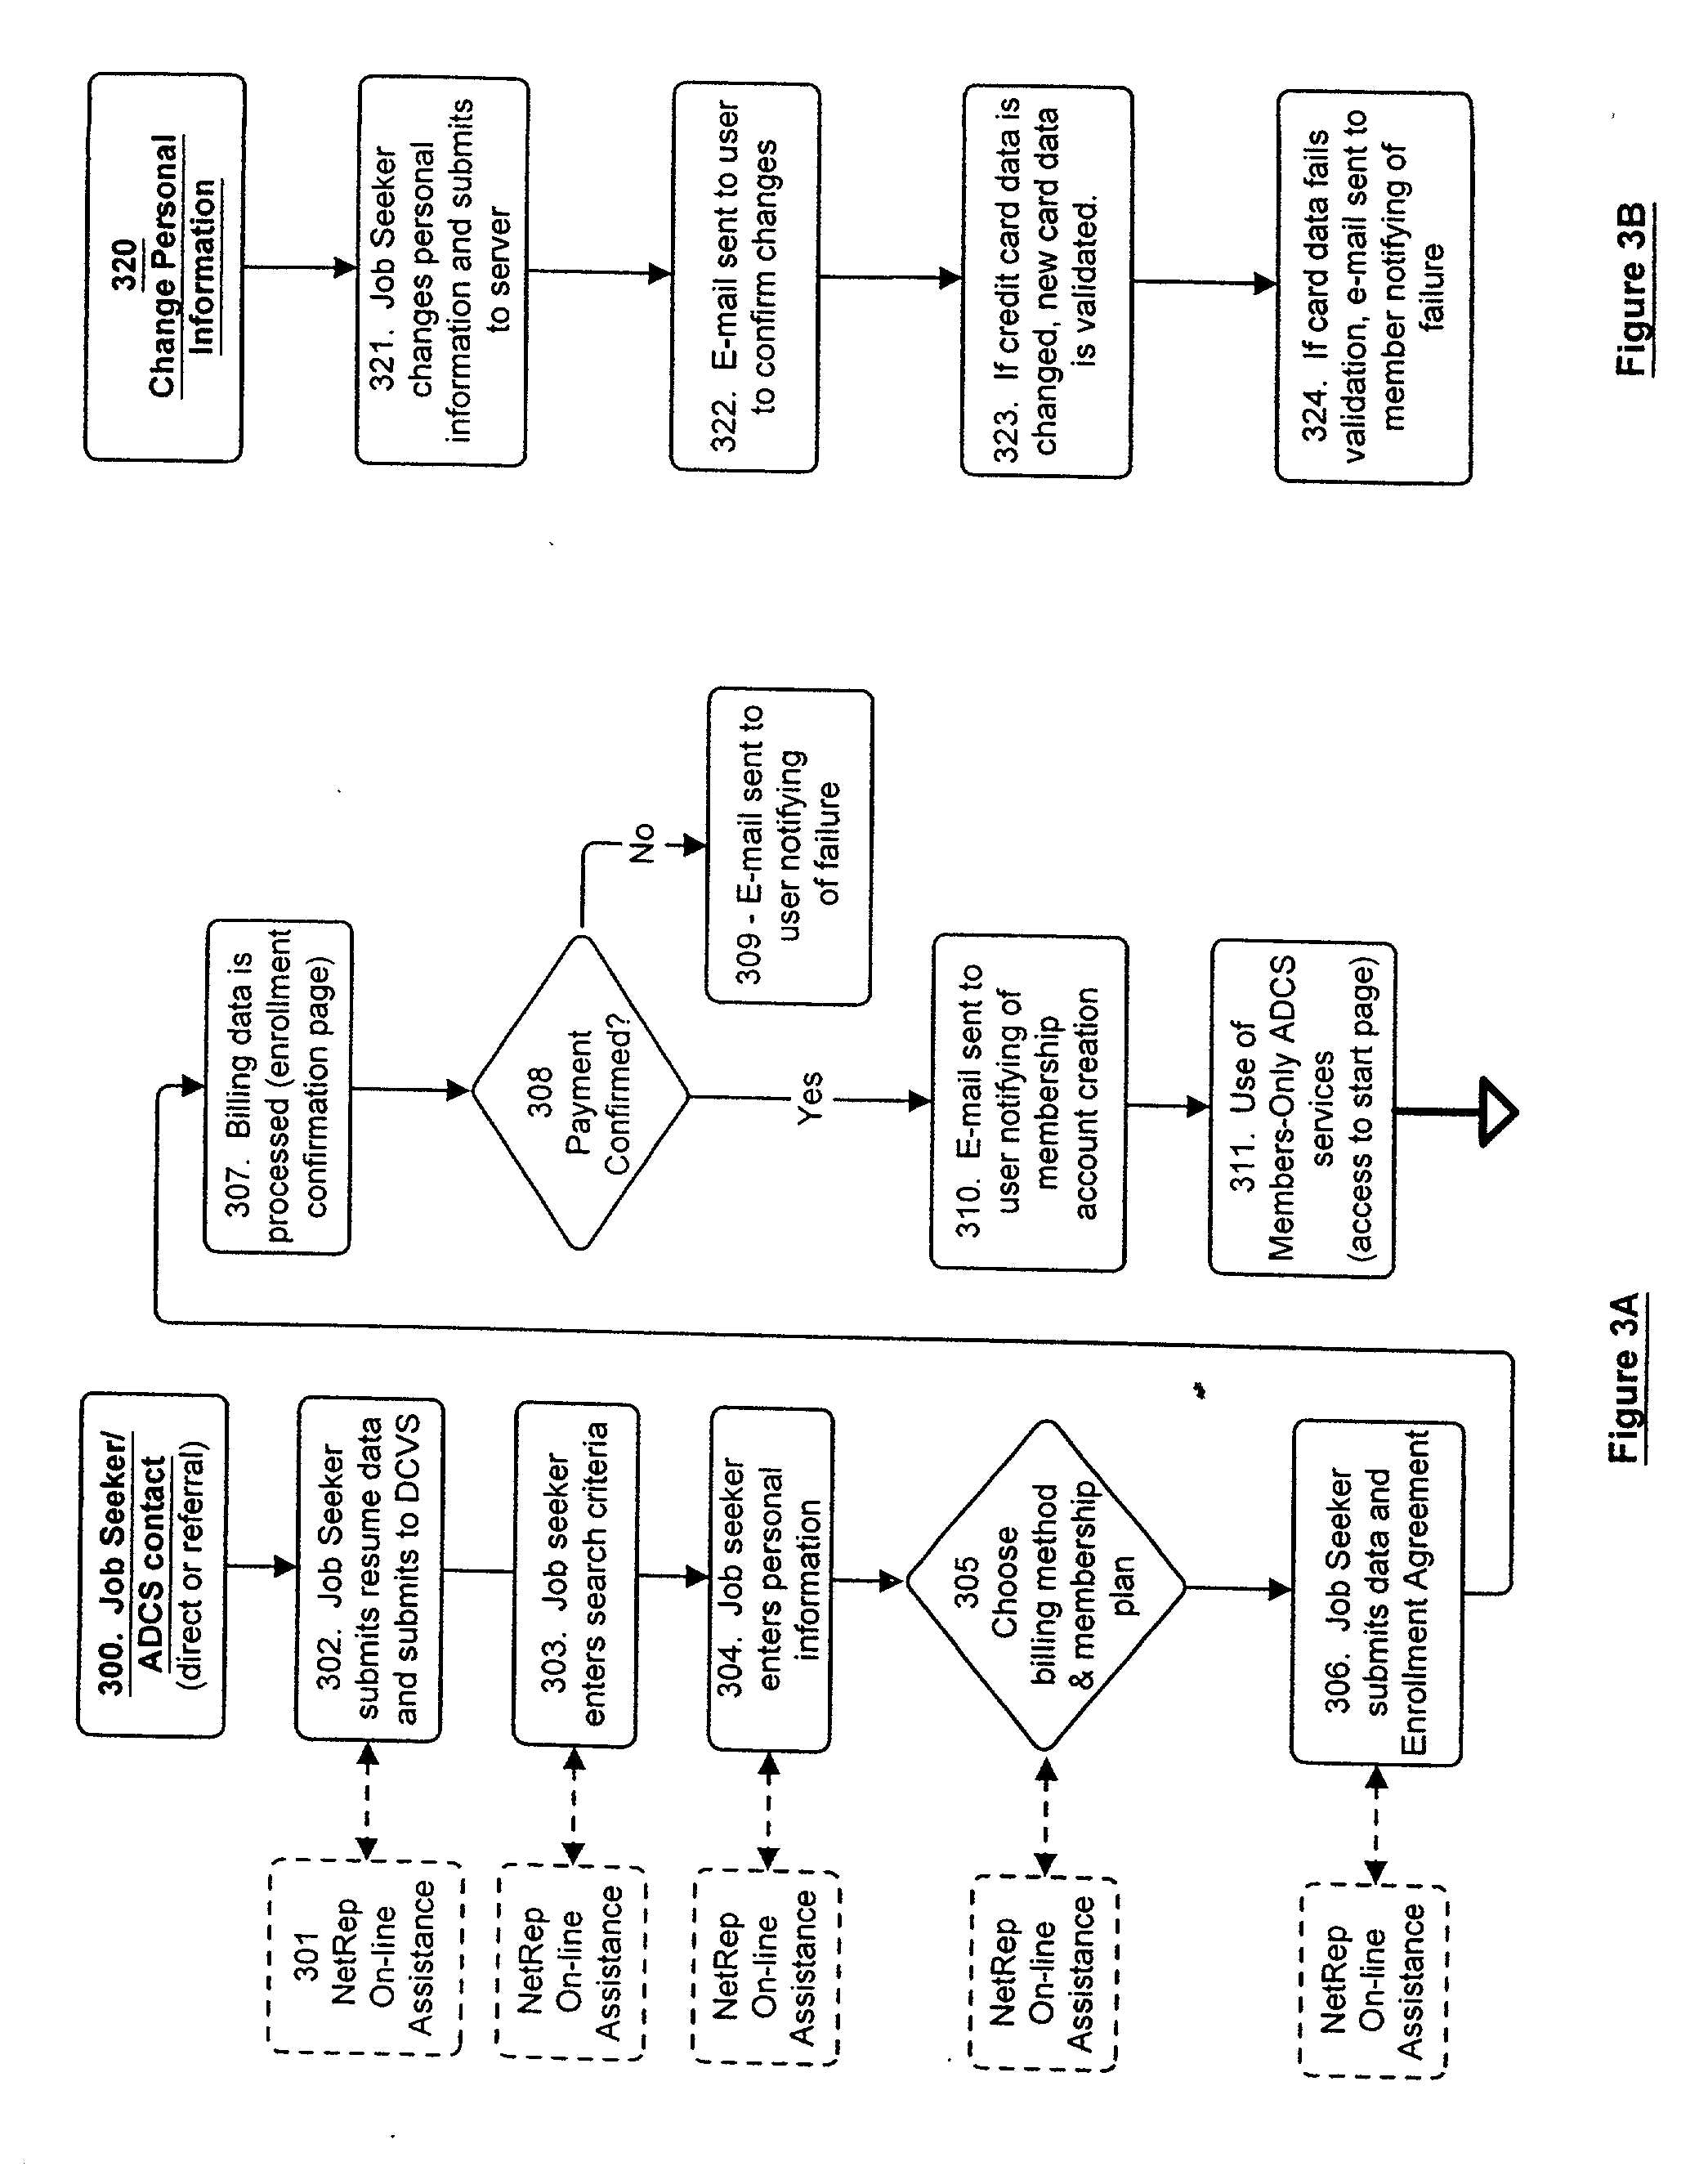 Data certification and verification system having a multiple- user-controlled data interface